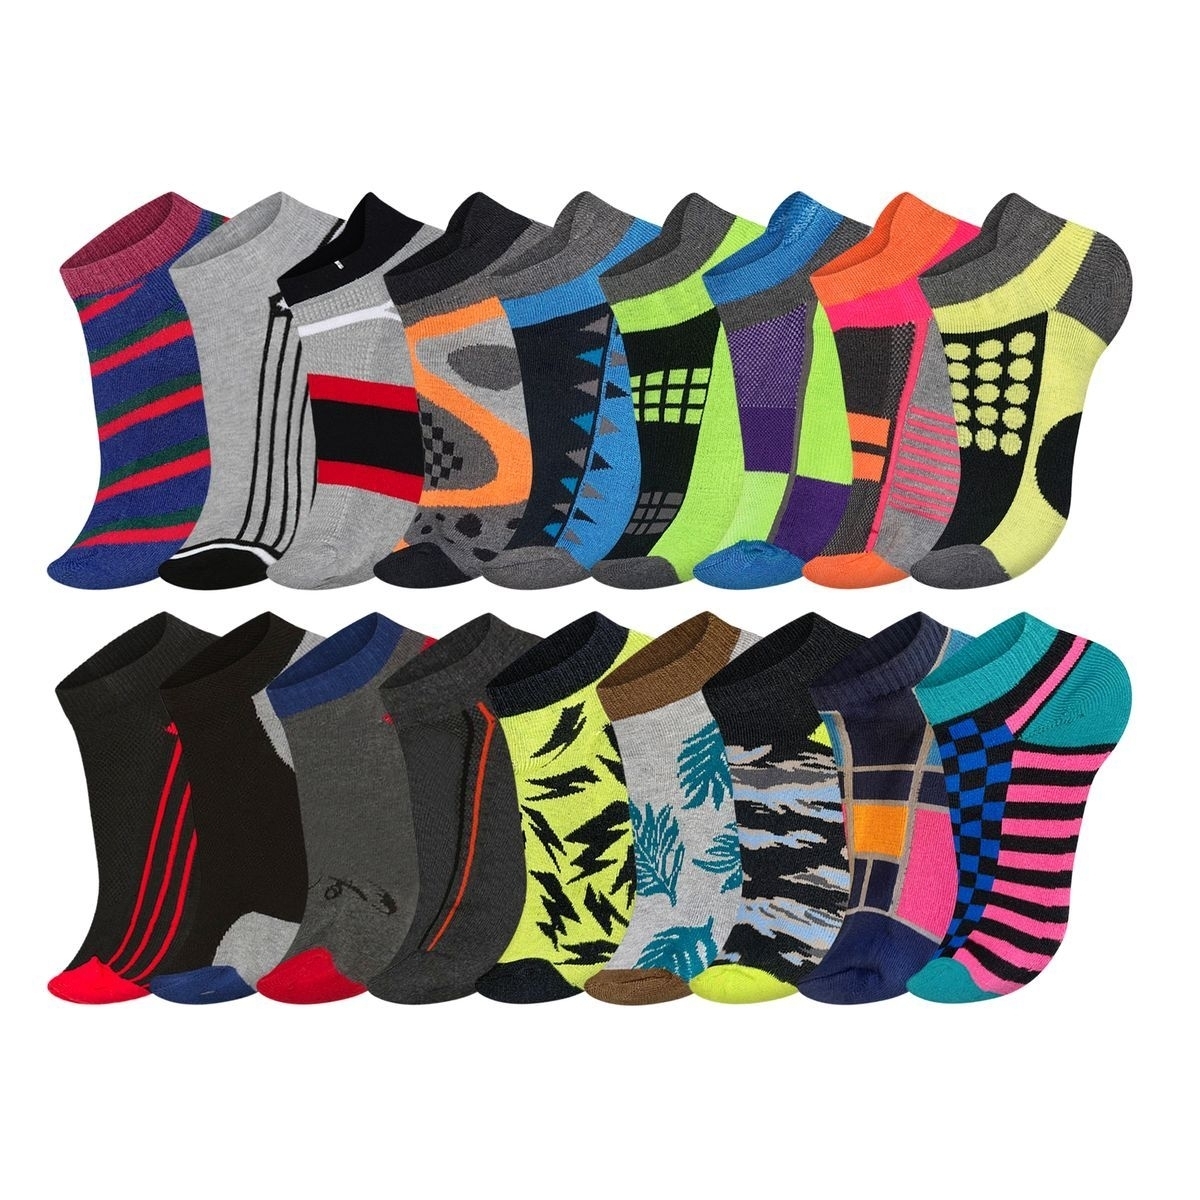 Multi-Pairs: Men's Moisture Wicking Mesh Performance Ankle Low Cut Cushion Athletic Sole Socks - 12-pairs